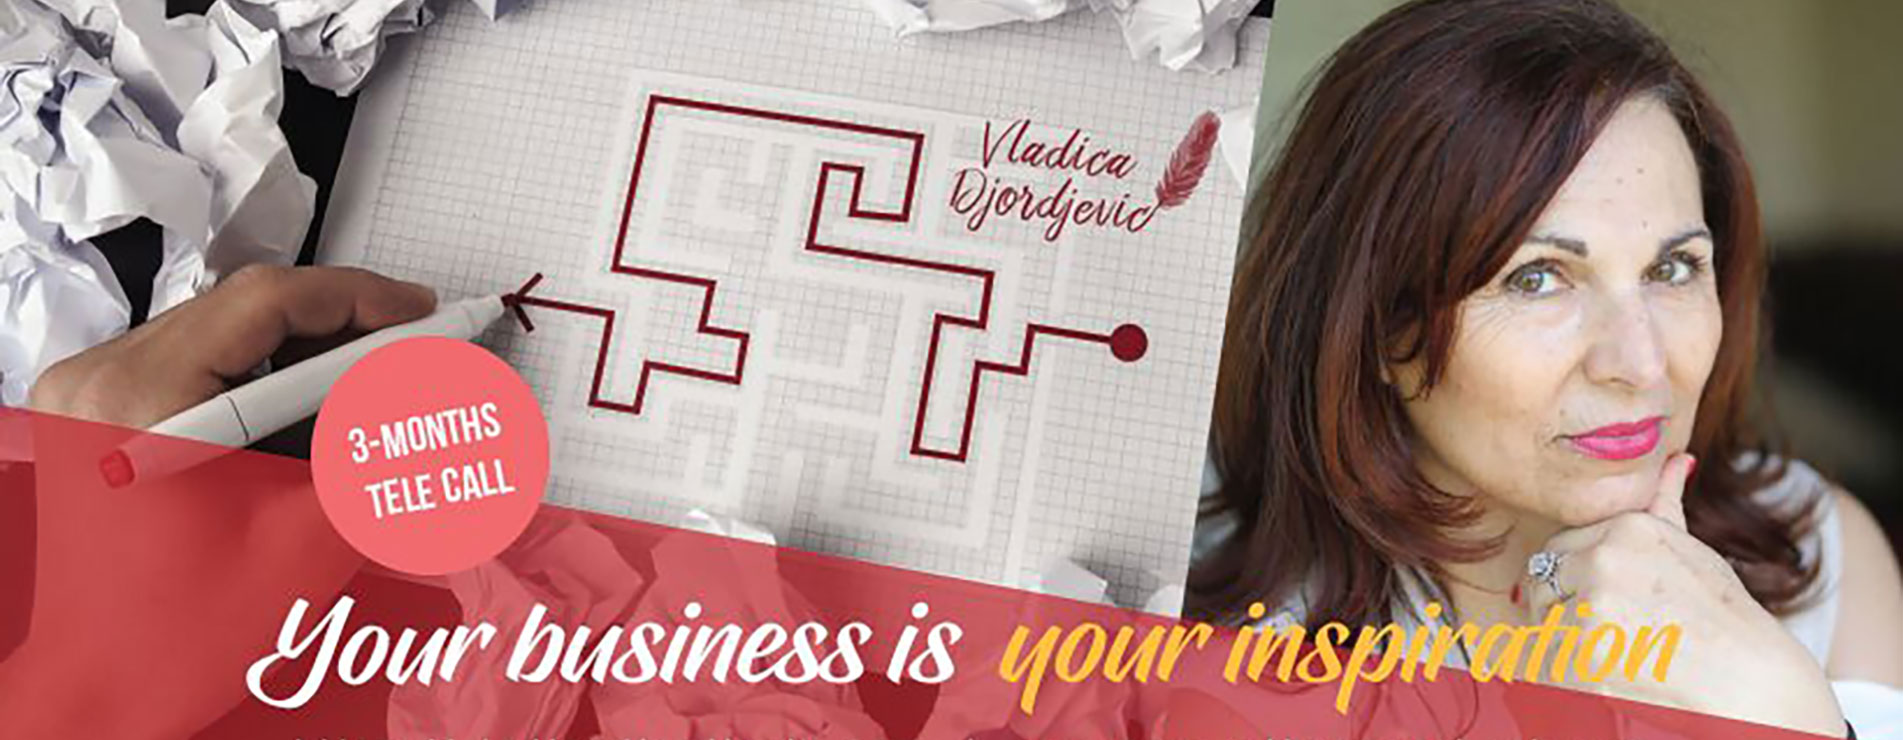 Your business is your inspiration – a labyrinth with the face of Vladica Djordjevic